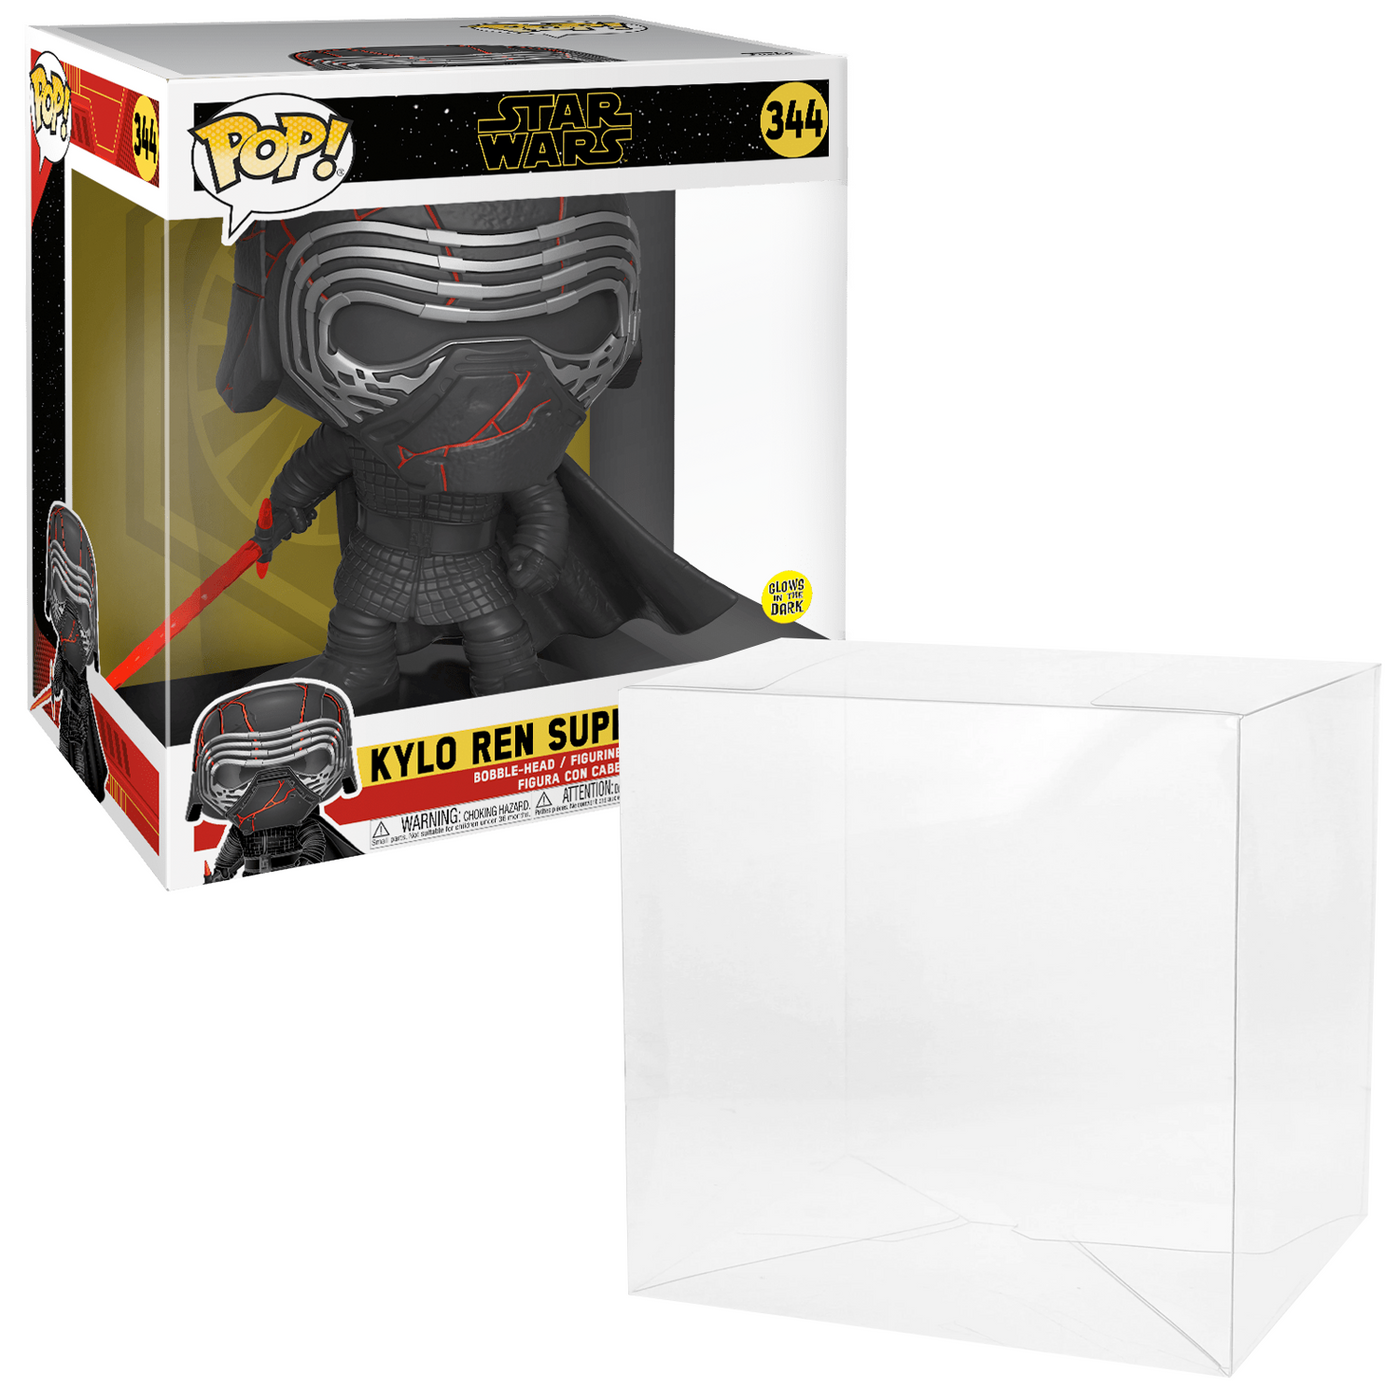 star wars kylo ren wide 10 inch best funko pop protectors thick strong uv scratch flat top stack vinyl display geek plastic shield vaulted eco armor fits collect protect display case kollector protector